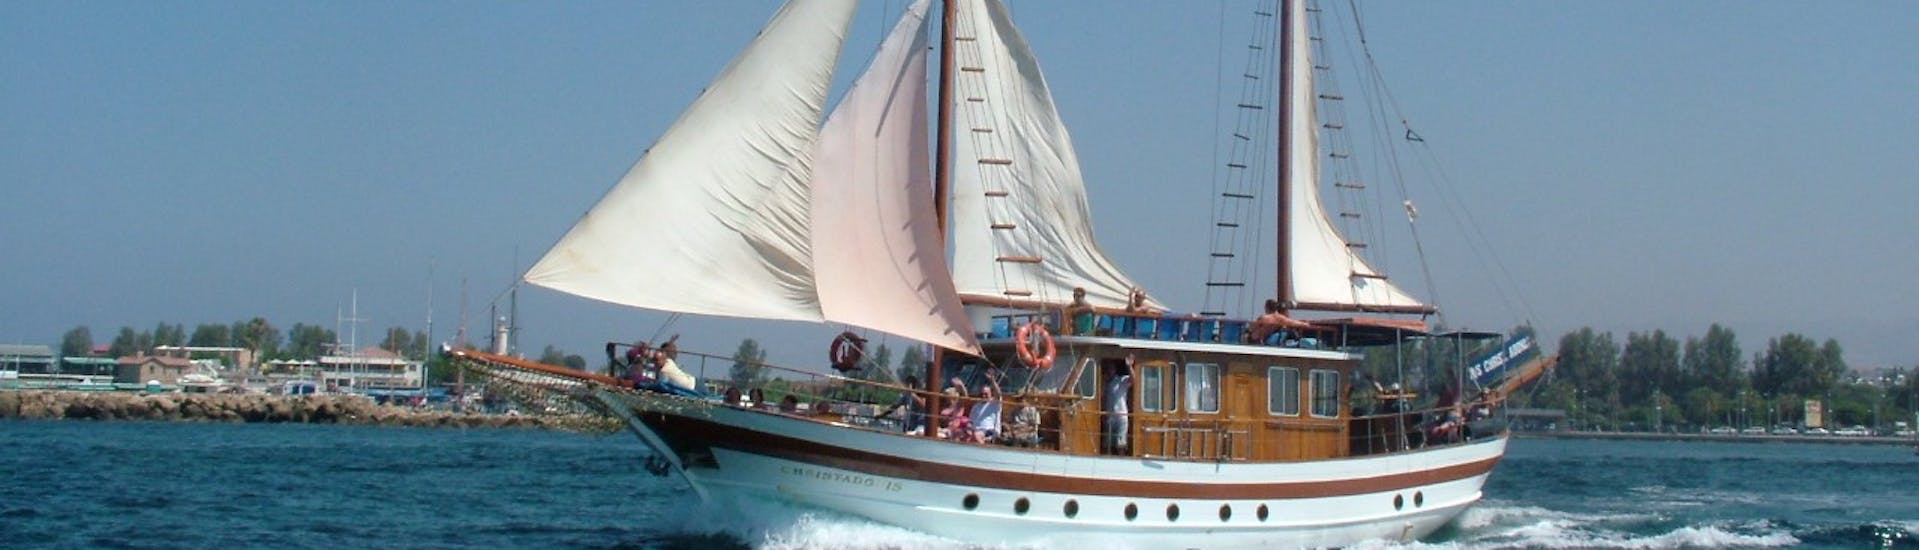 Photo of the sailing trip from Paphos to Coral Bay or Timi.